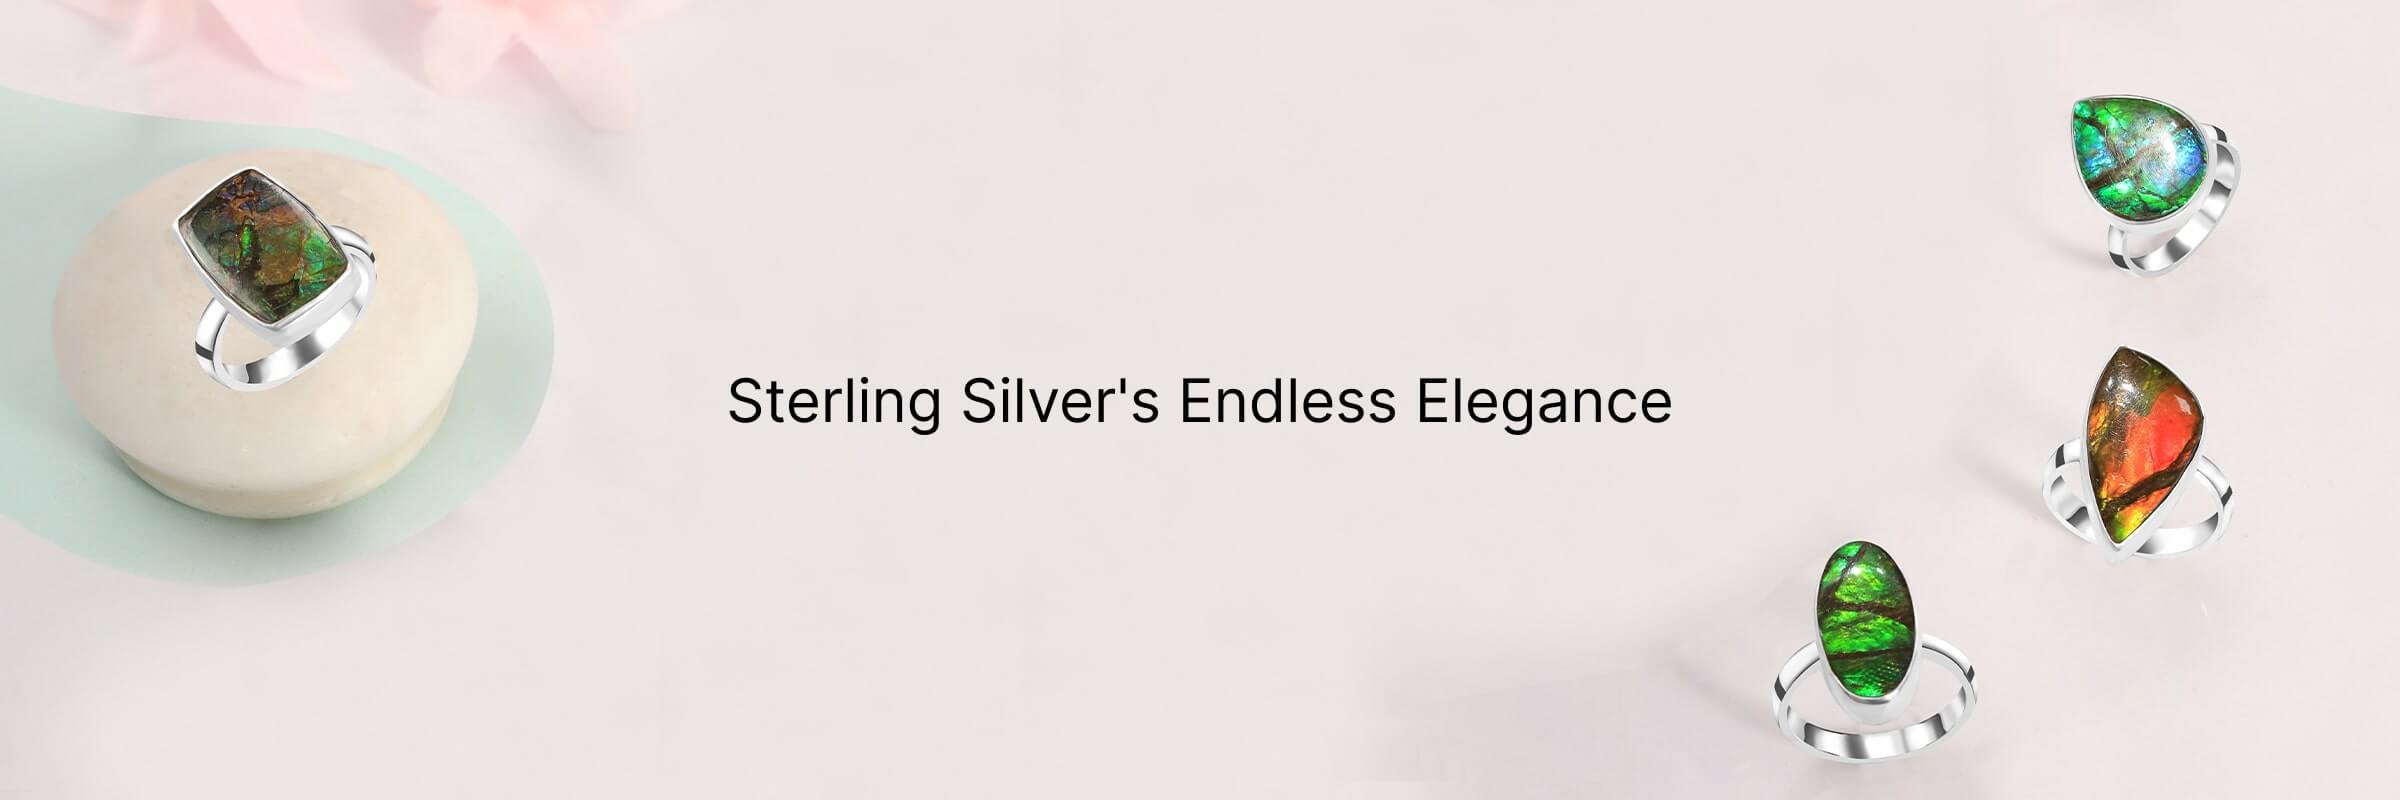 Benefits of Wearing Sterling Silver